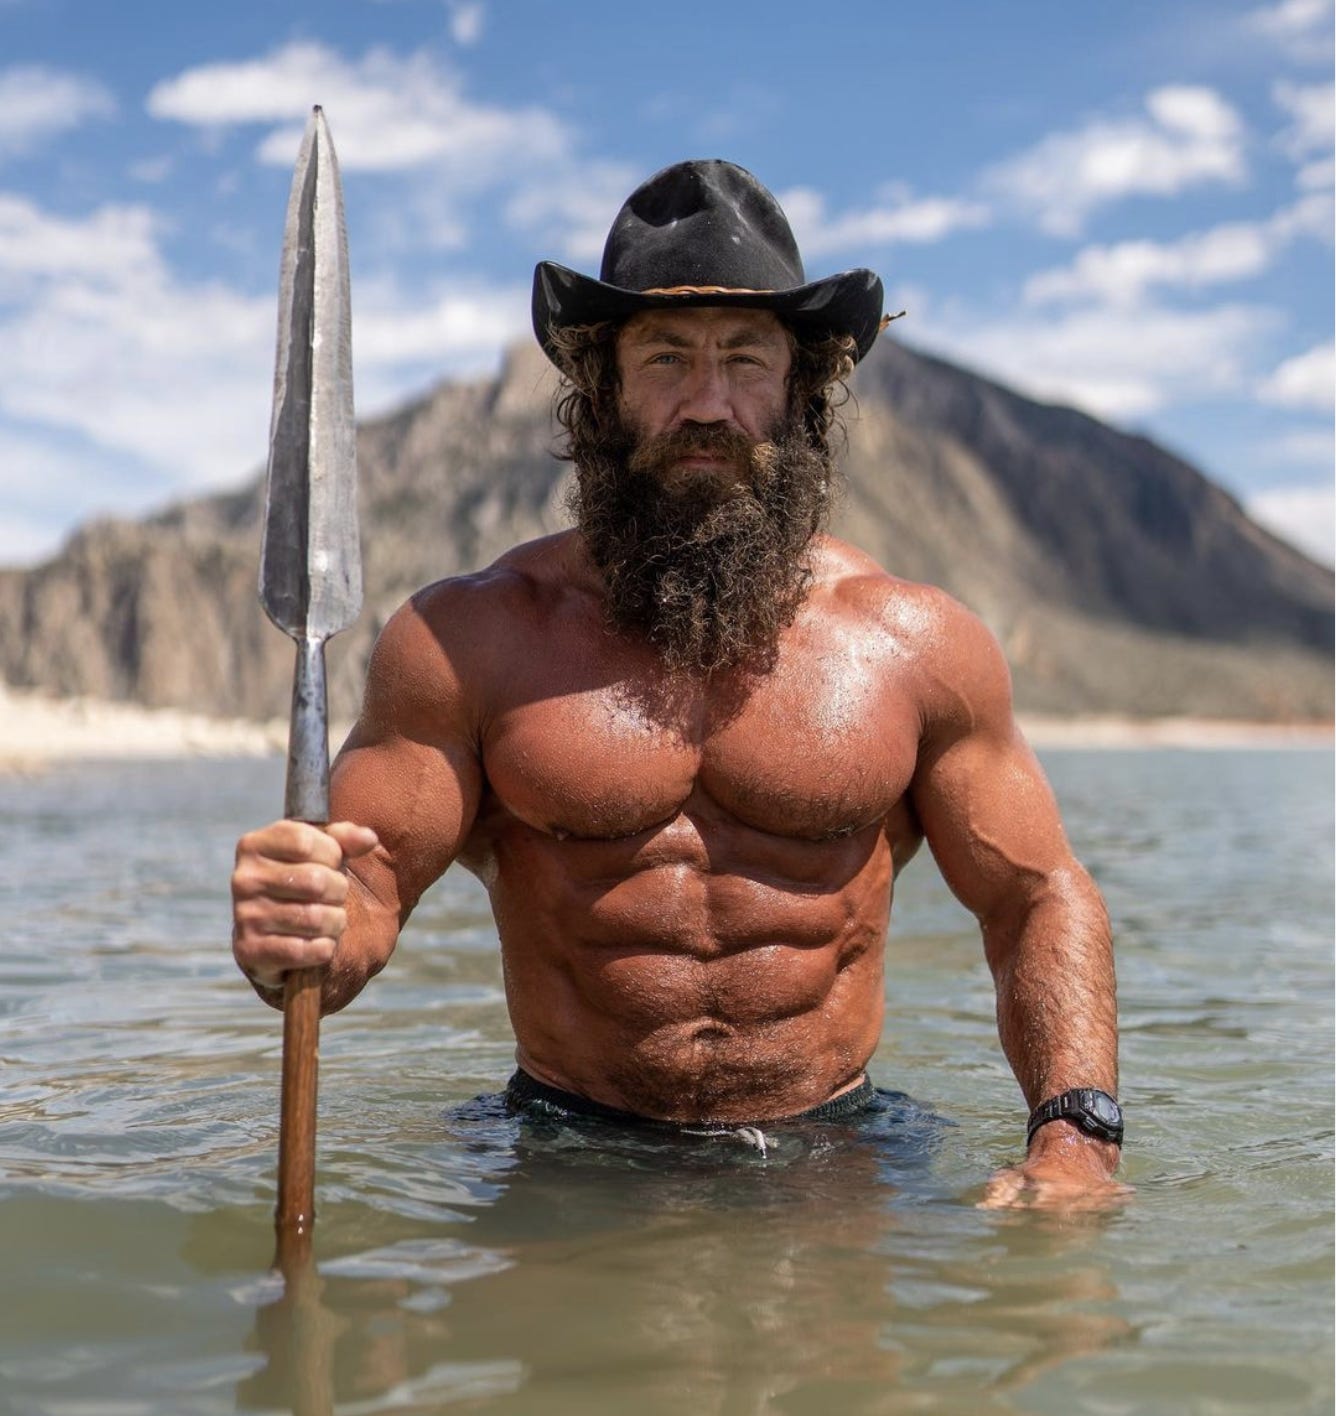 Unnaturally fit man standing in water with a hat holding a spear.